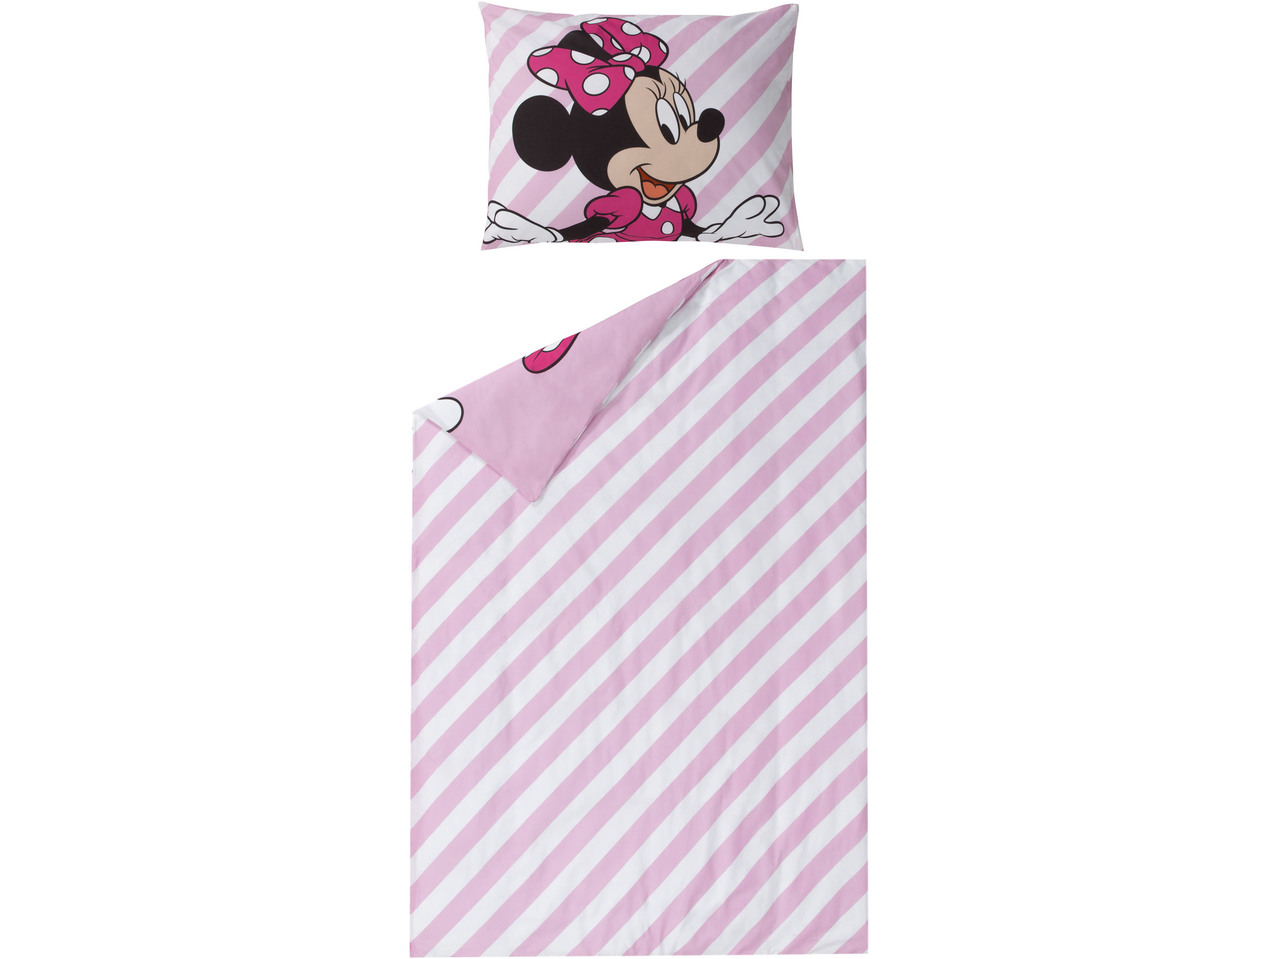 Kids' Single Bedset "Minnie, Princess, Frozen, Cars, Mickey Mouse, Spiderman"